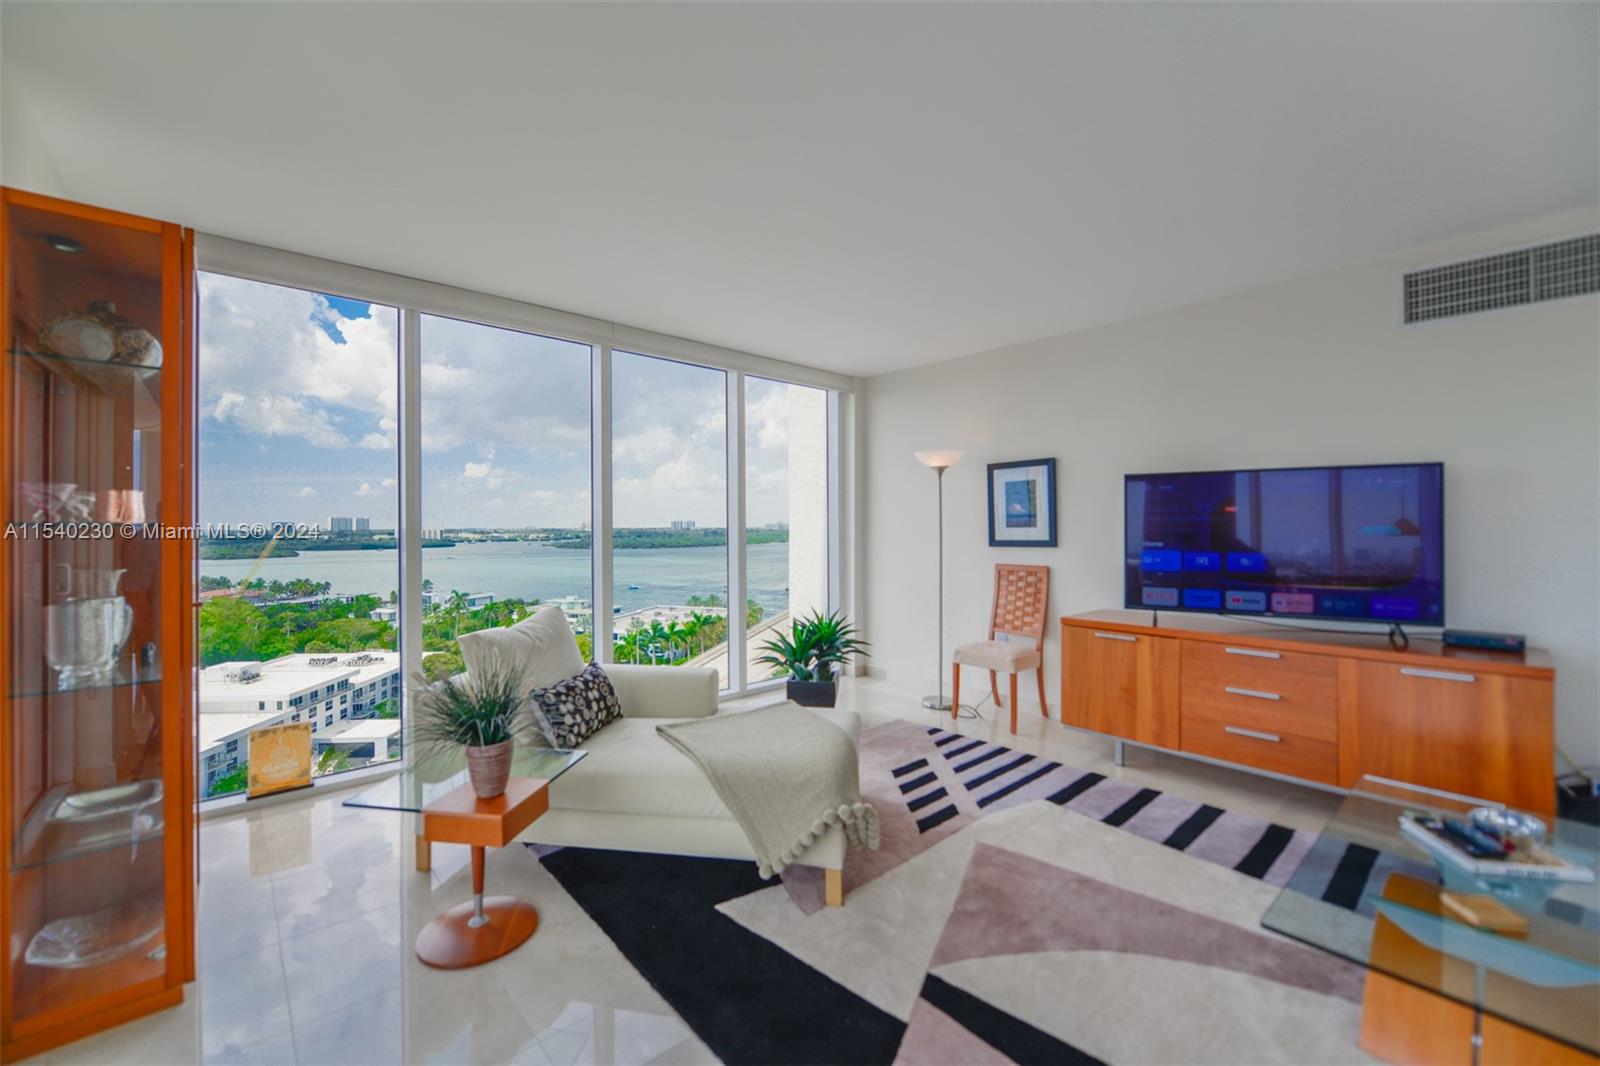 Enjoy oceanfront living and amazing sunsets from this 2/2.5 bathroom apartment at south east corner. Harbour House is located in the heart of Bal Harbour. Upgraded unit with marble and carpet floors throughout, nicely furnished. Building amenities include state of art gym, huge pool, jacuzzi, steam room, sauna, media lounge, café, club room, tennis & pool tables, plus beach service with umbrellas and chairs. Also, 24 hours valet, front desk and security. Walking distance to Bal Harbour shops. Easy to show. No pets please.